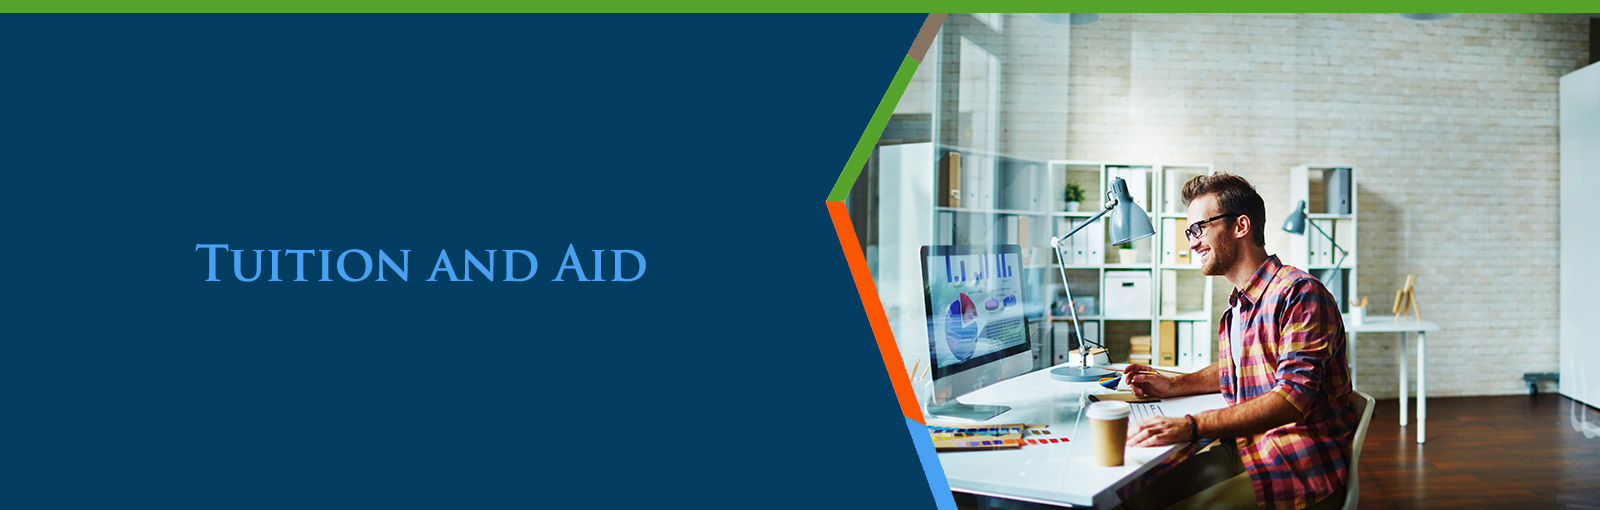 tuition and aid section header